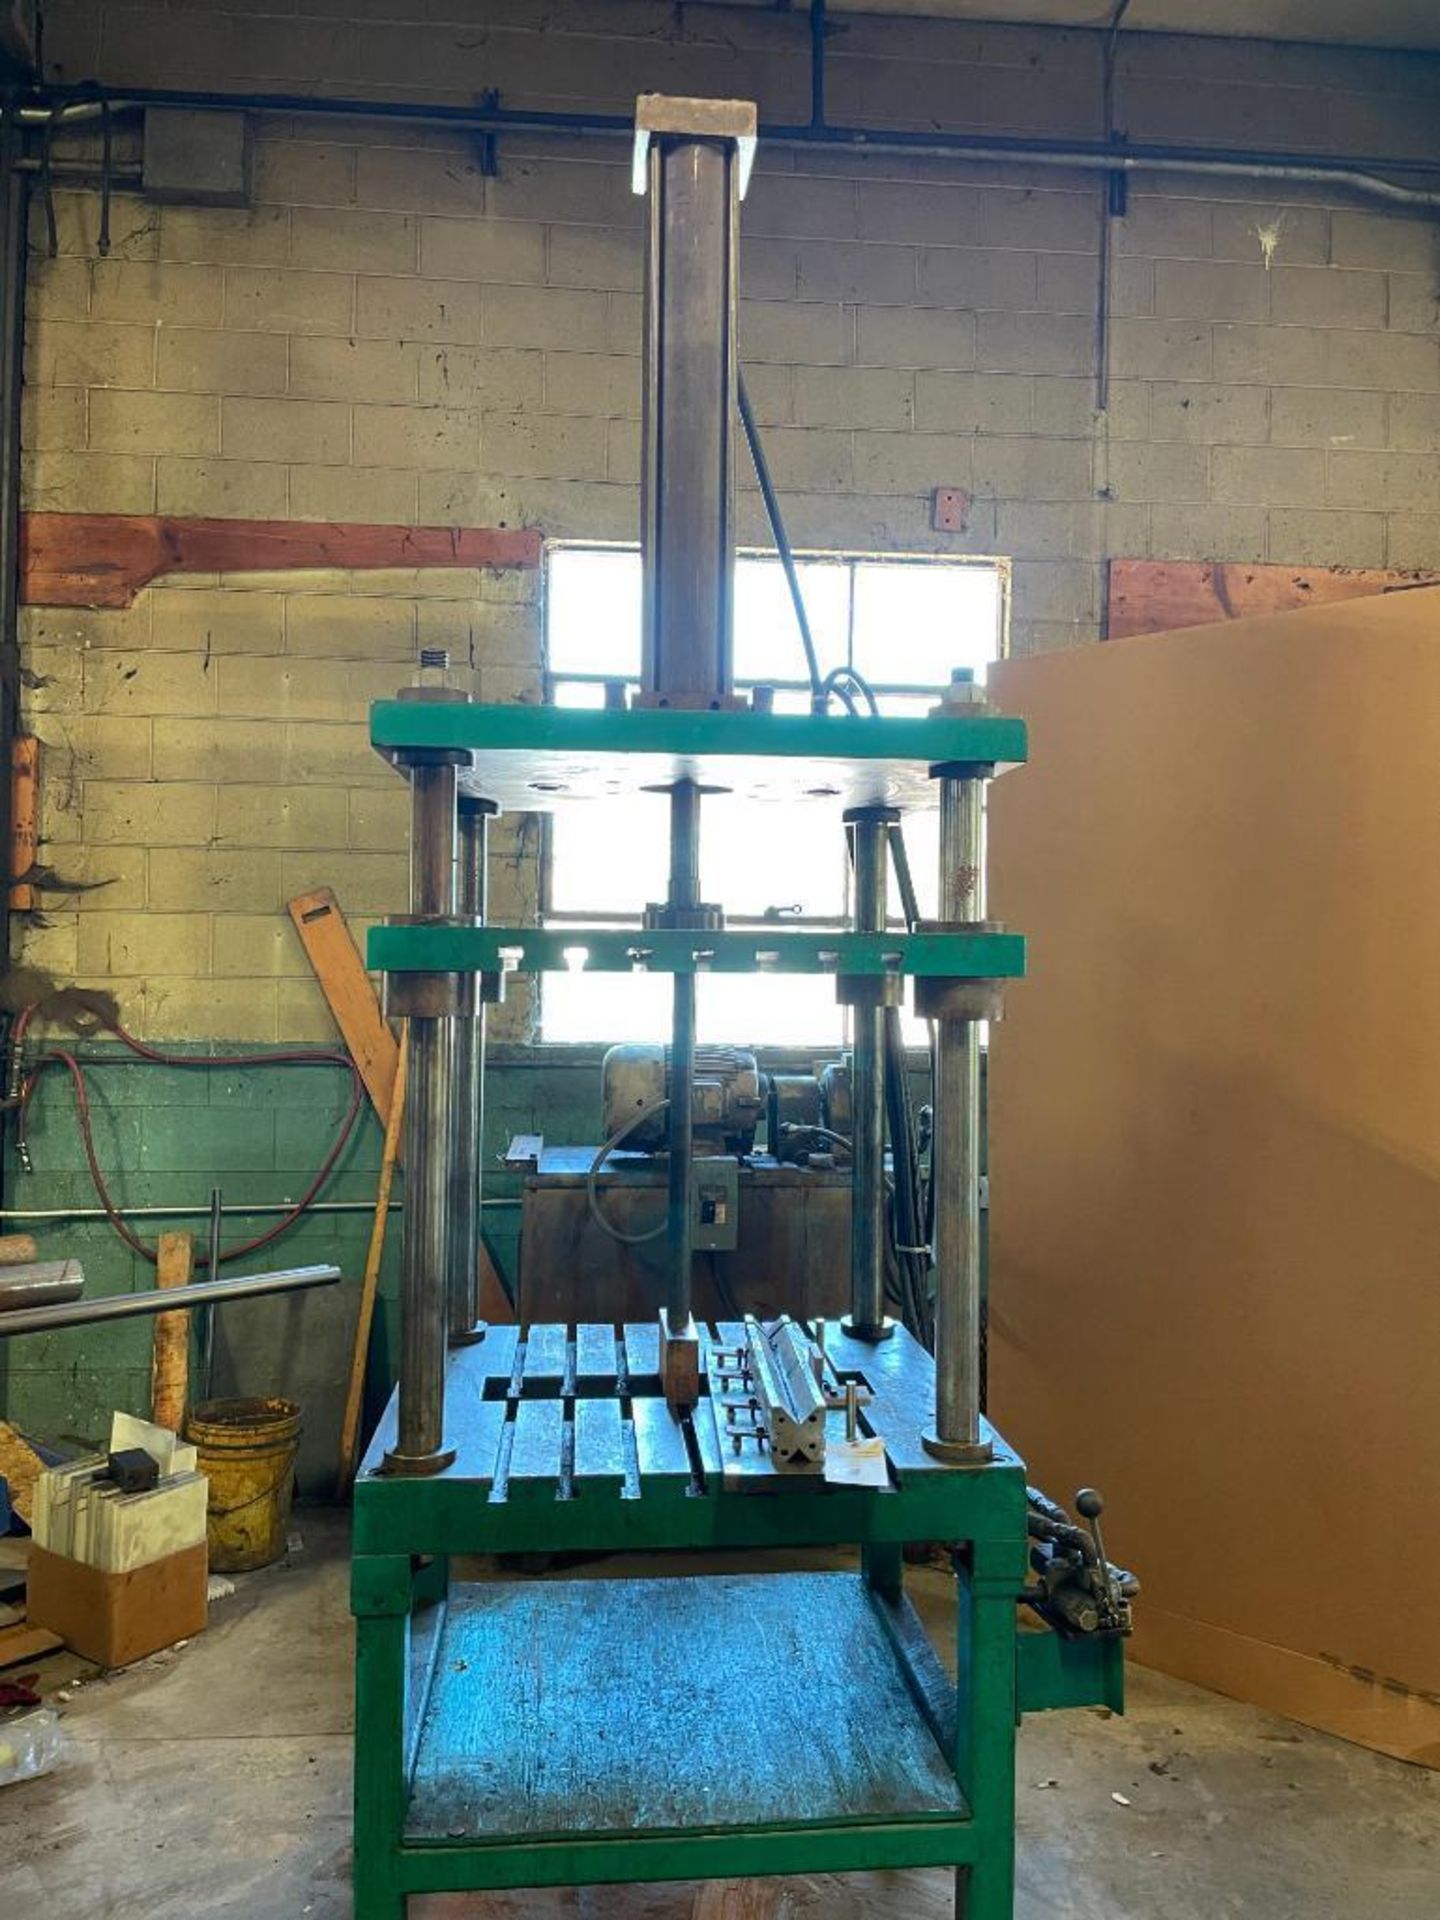 4 POST HYDRAULIC PRESS AND ACCESSORIES; $750 LOADING FEE